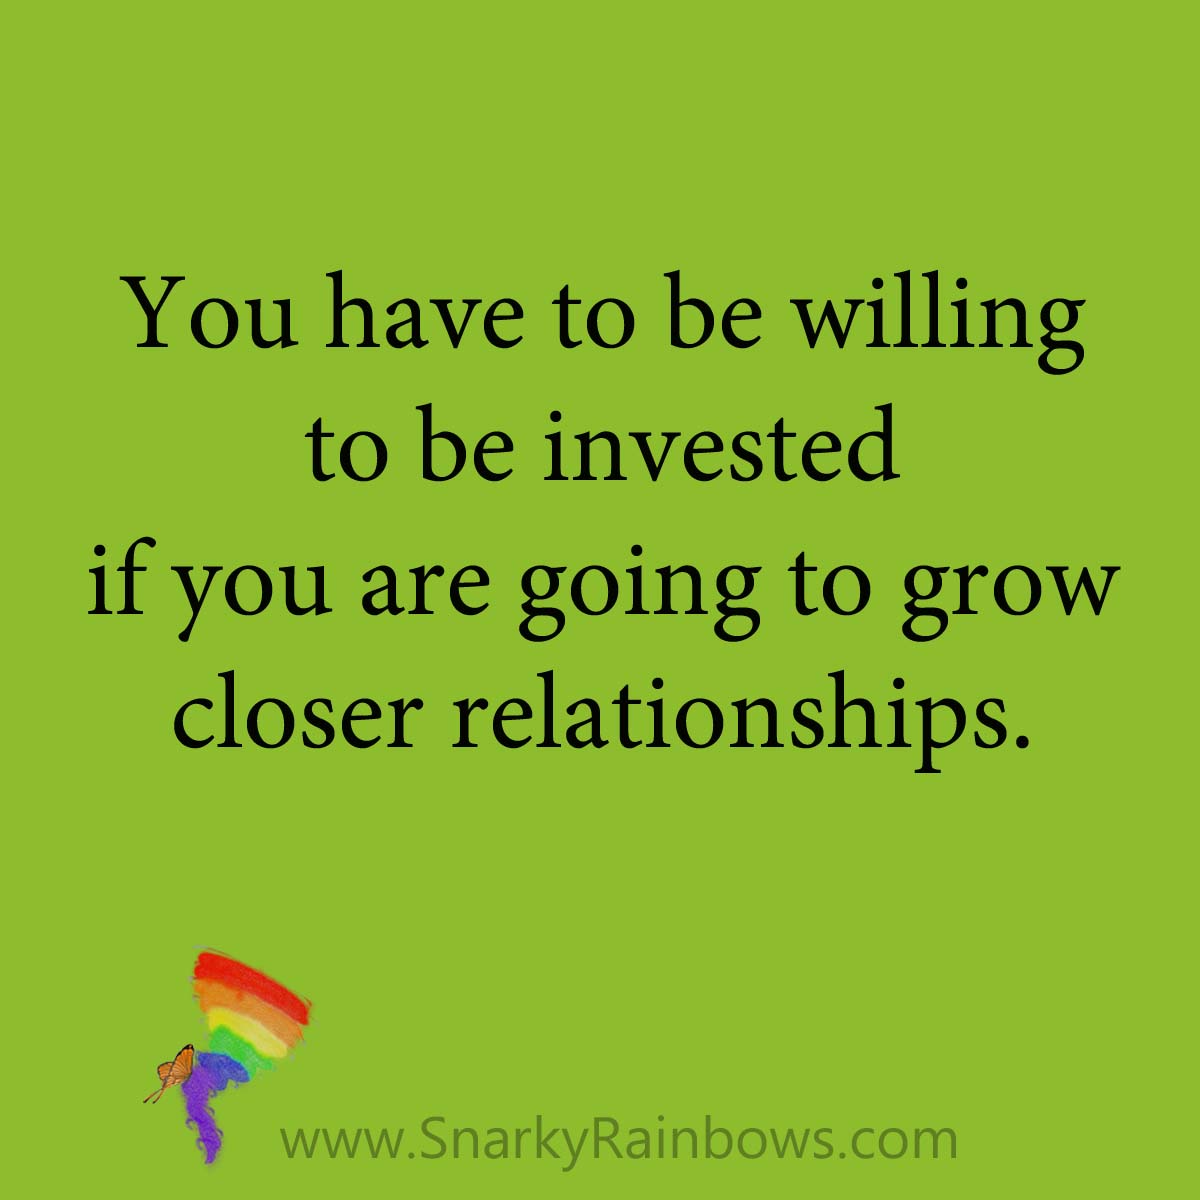 Quote - be willing to be invested